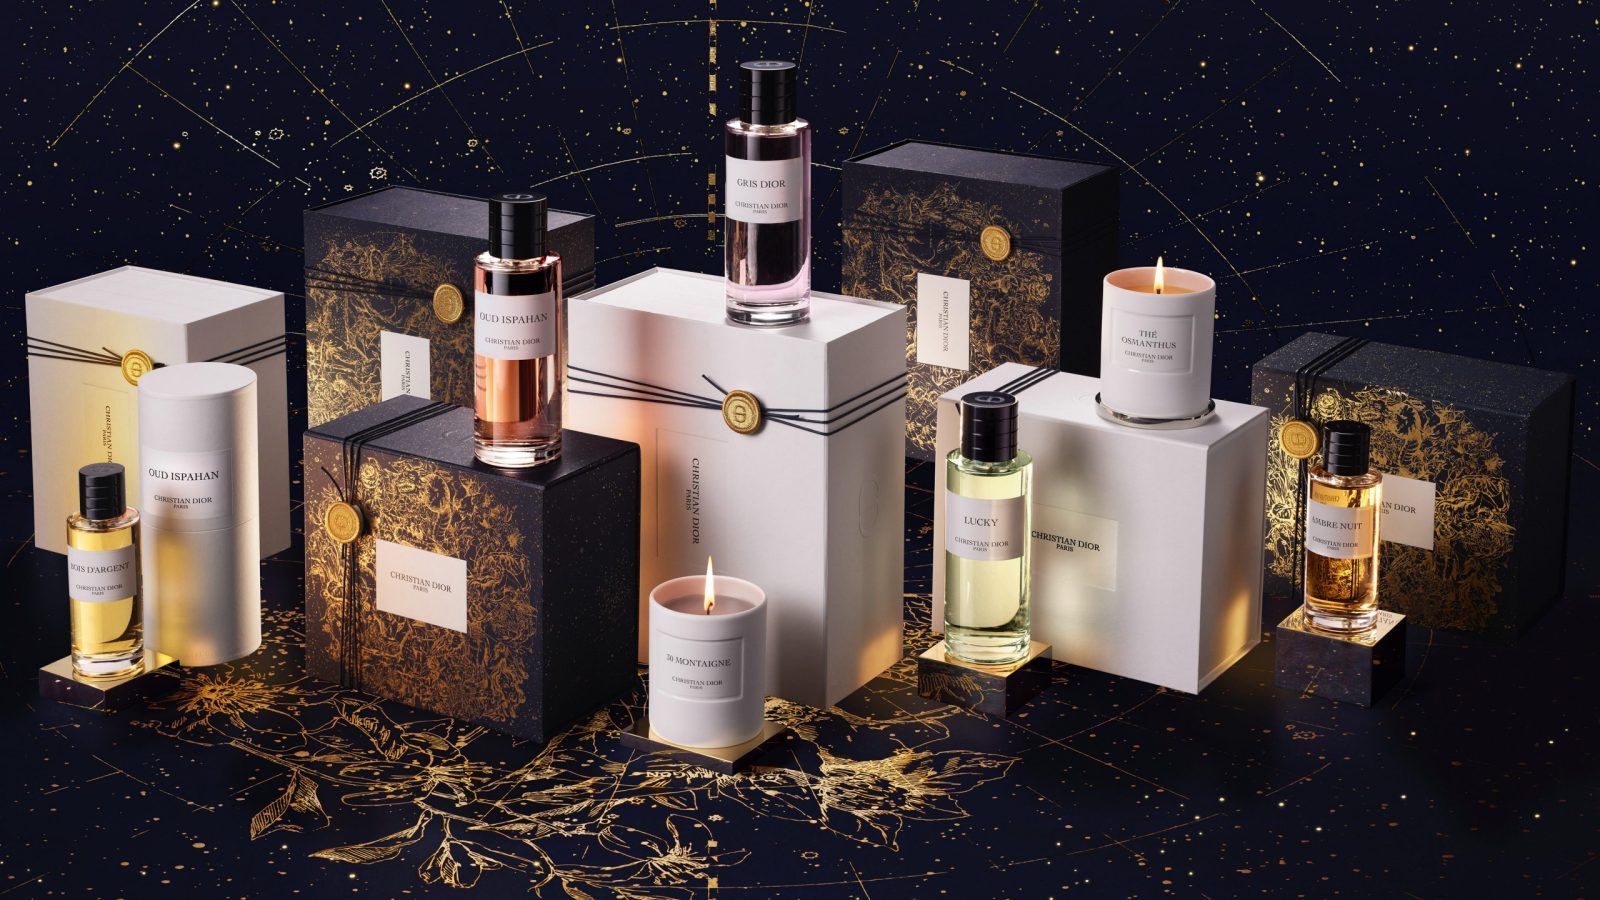 La Collection Privée Christian Dior arrives just in time for Christmas